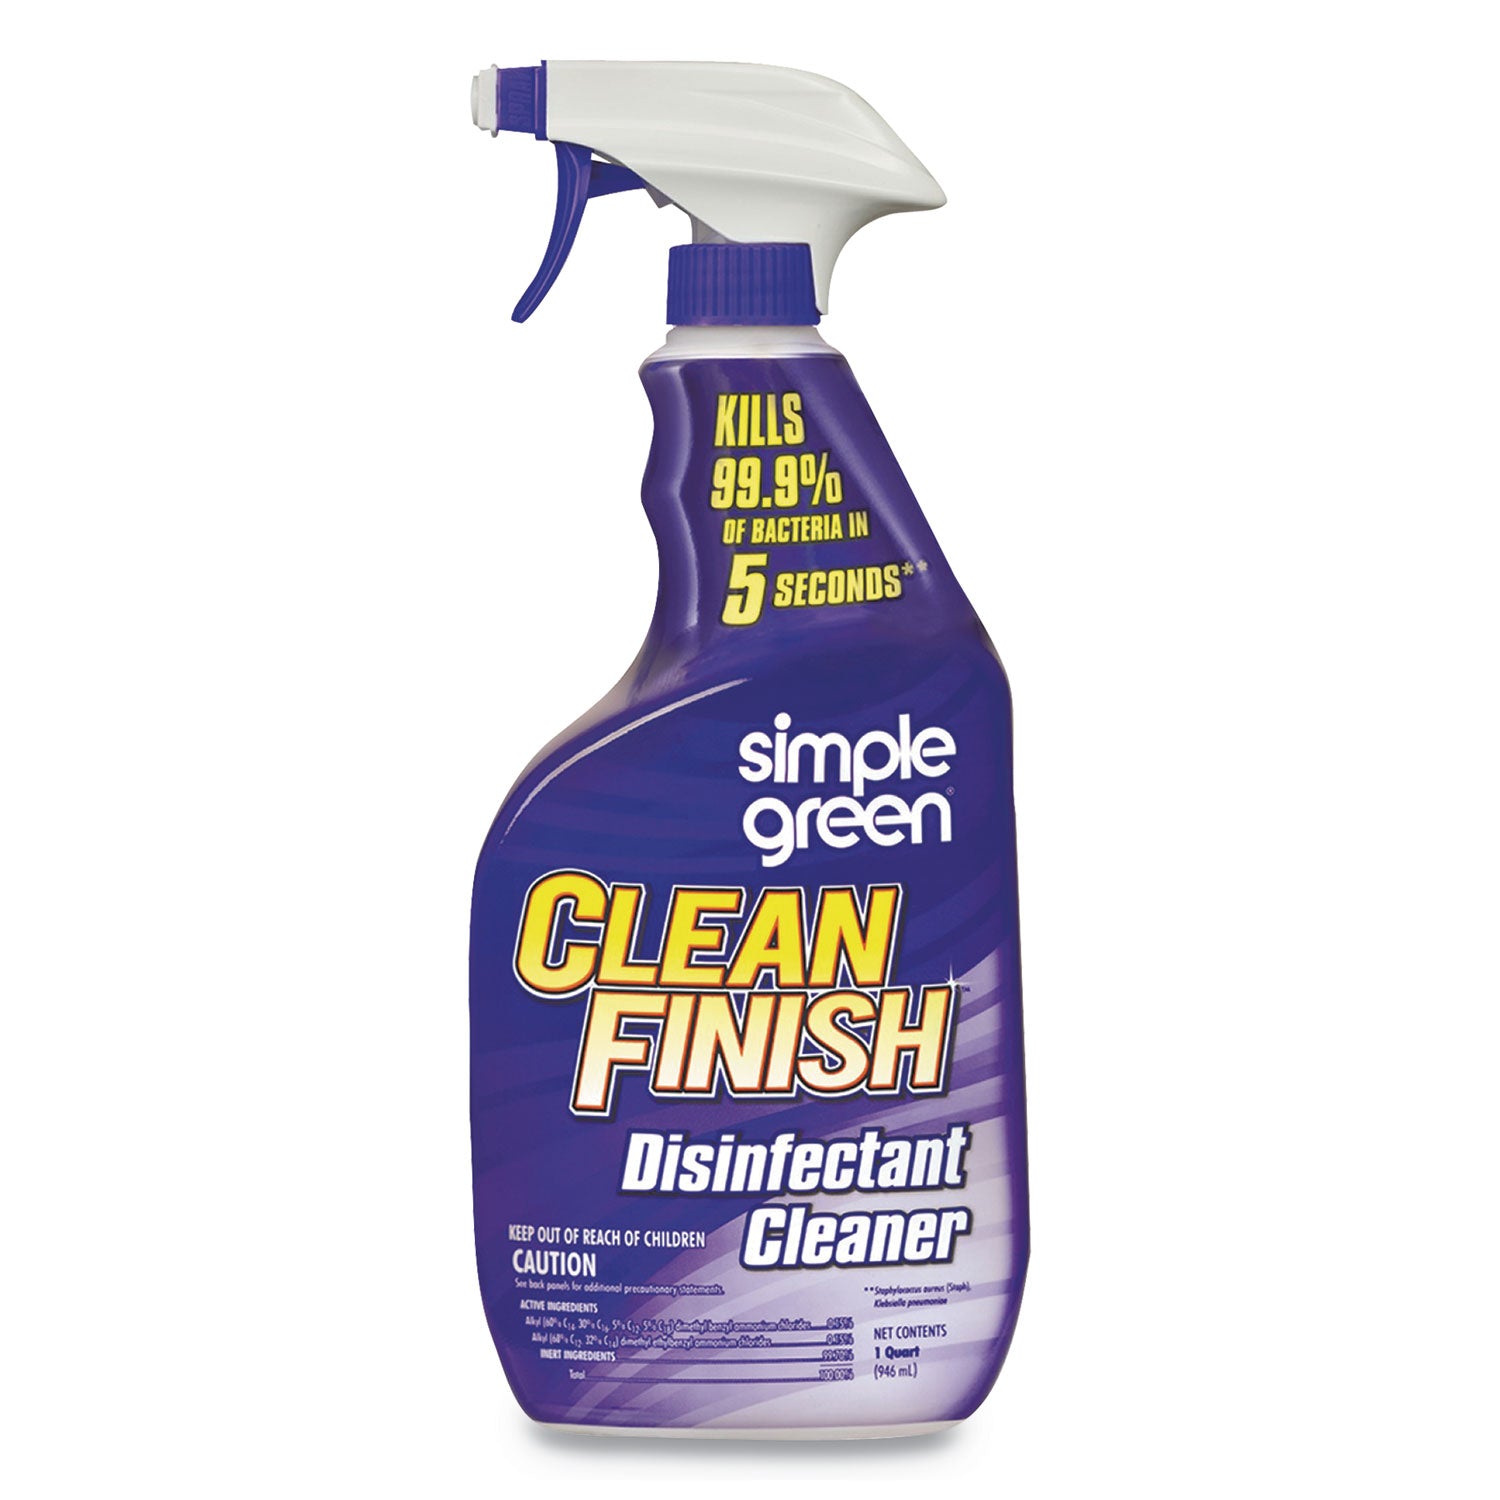 clean-finish-disinfectant-cleaner-herbal-32-oz-spray-bottle-12-carton_smp01032 - 1